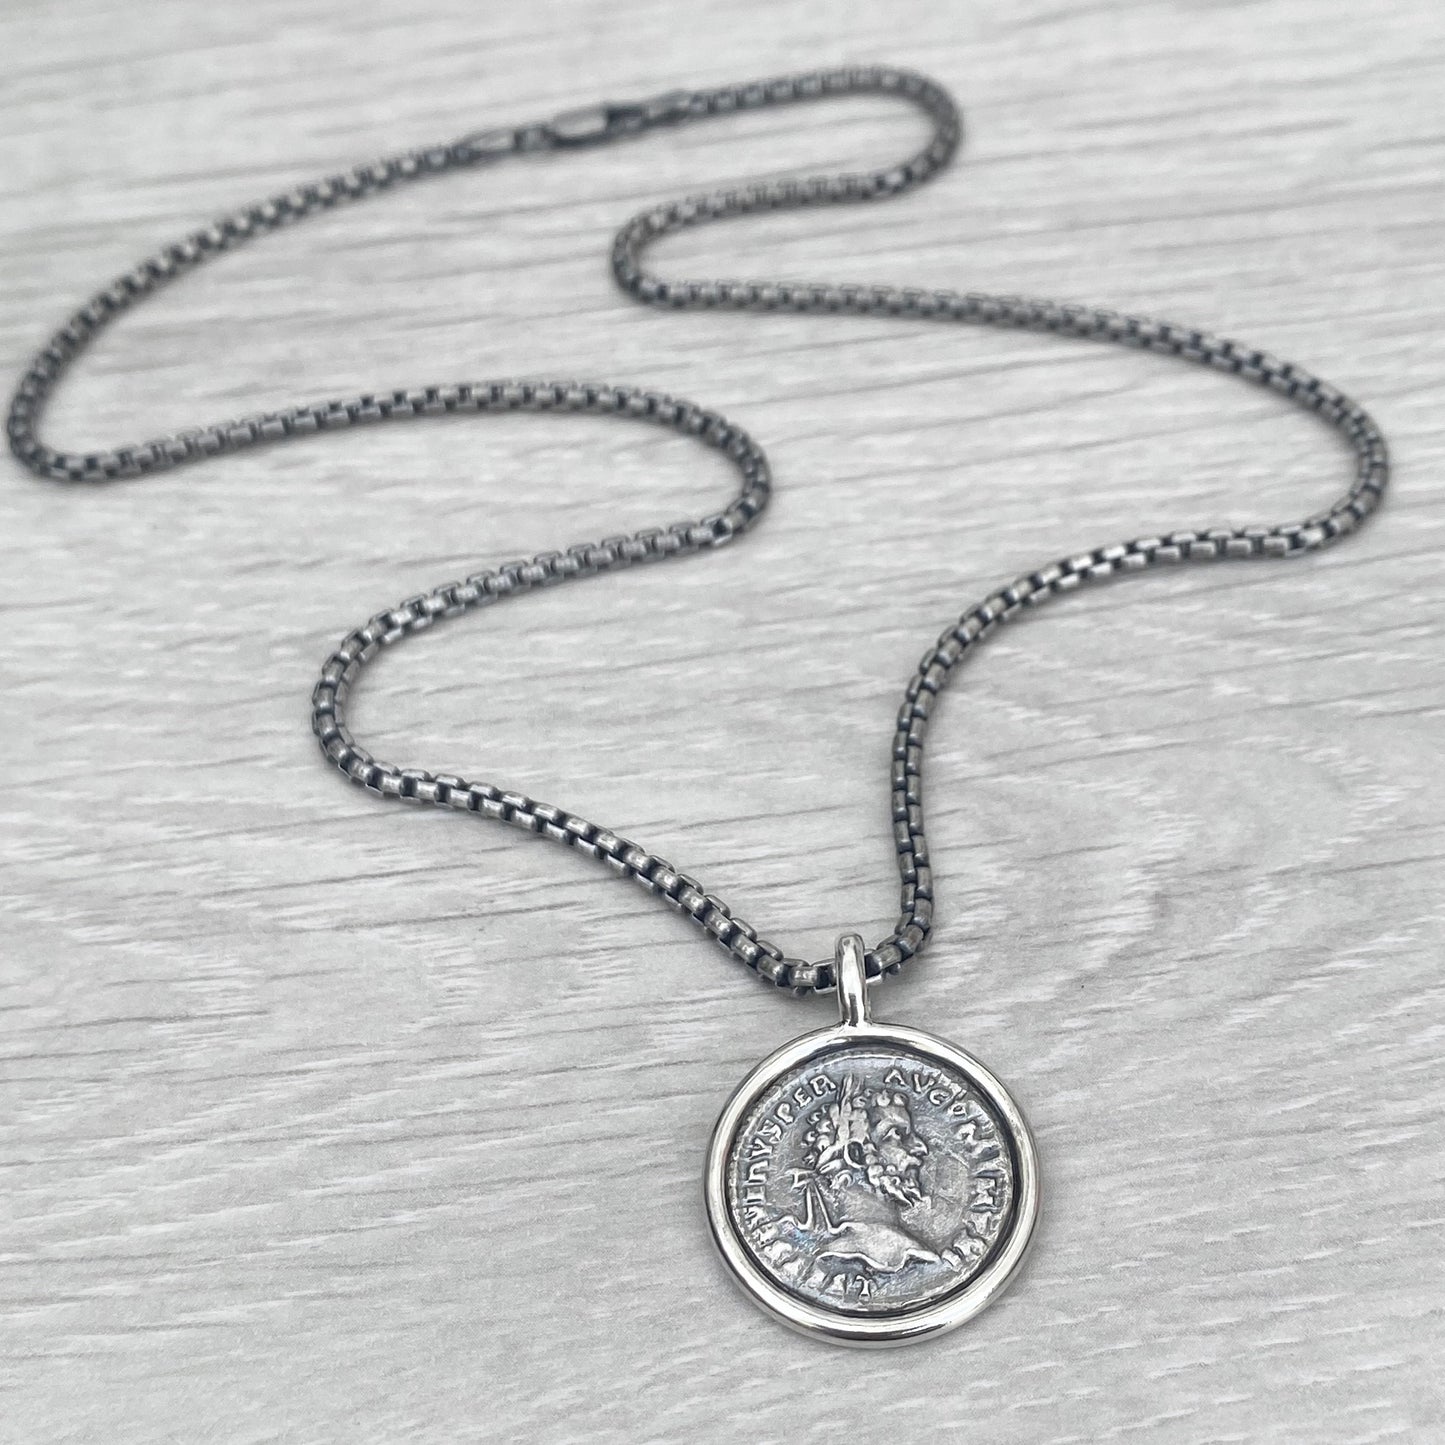 Oxidised solid Sterling silver 21mm replica Roman coin circle framed pendant on a choice of spiga or round box chain